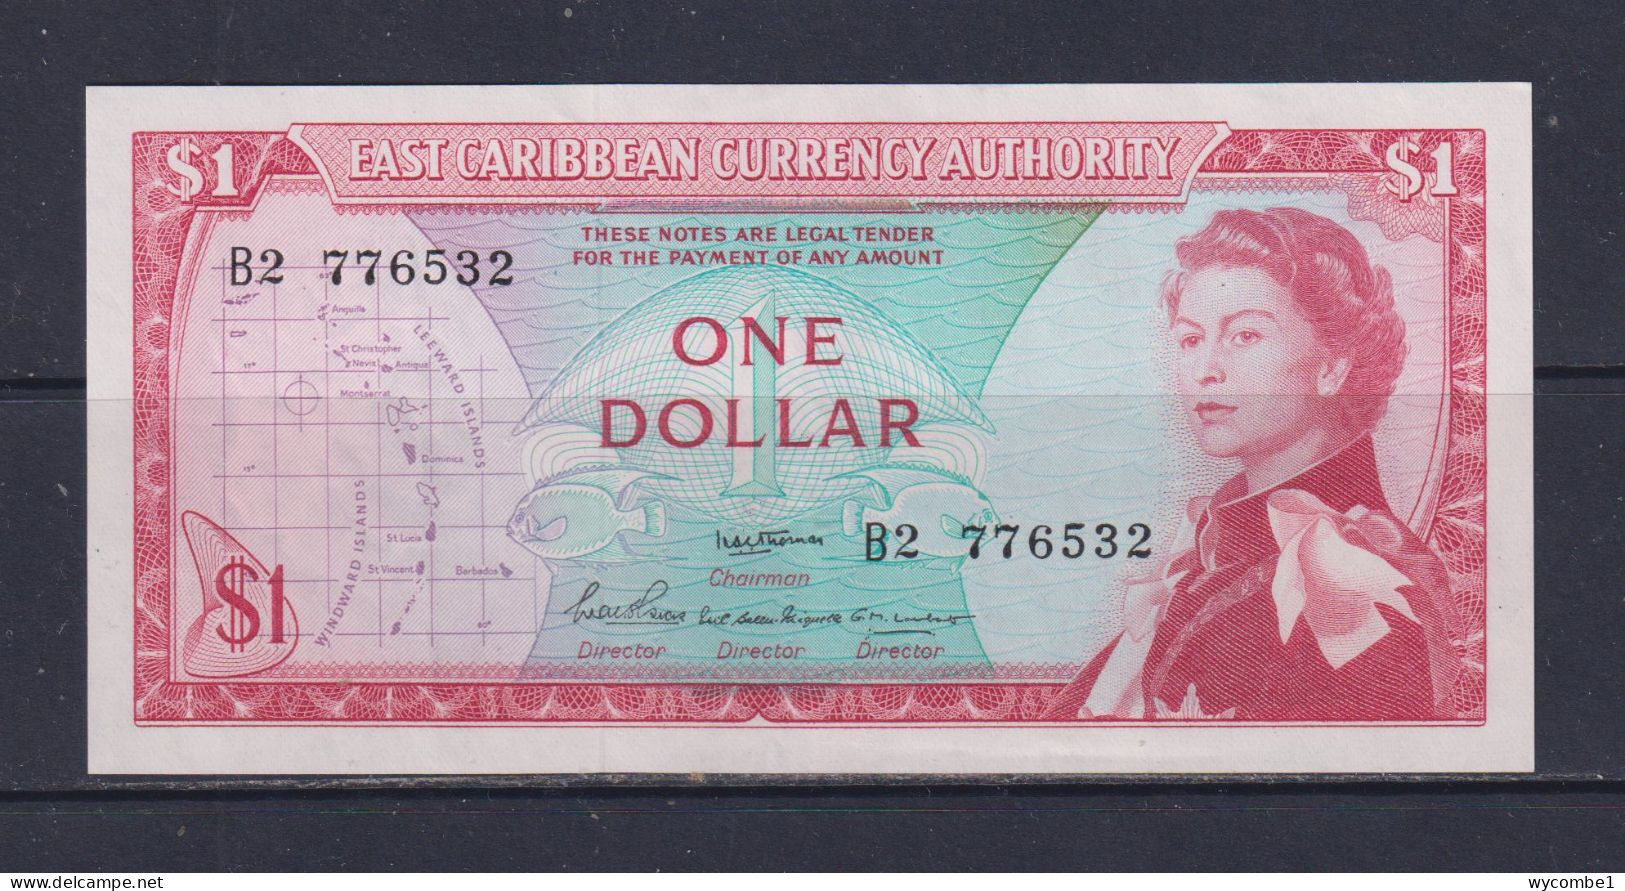 EAST CARIBBEAN CURRENCY AUTHORITY - 1965 1 Dollar AUNC/XF Banknote - East Carribeans